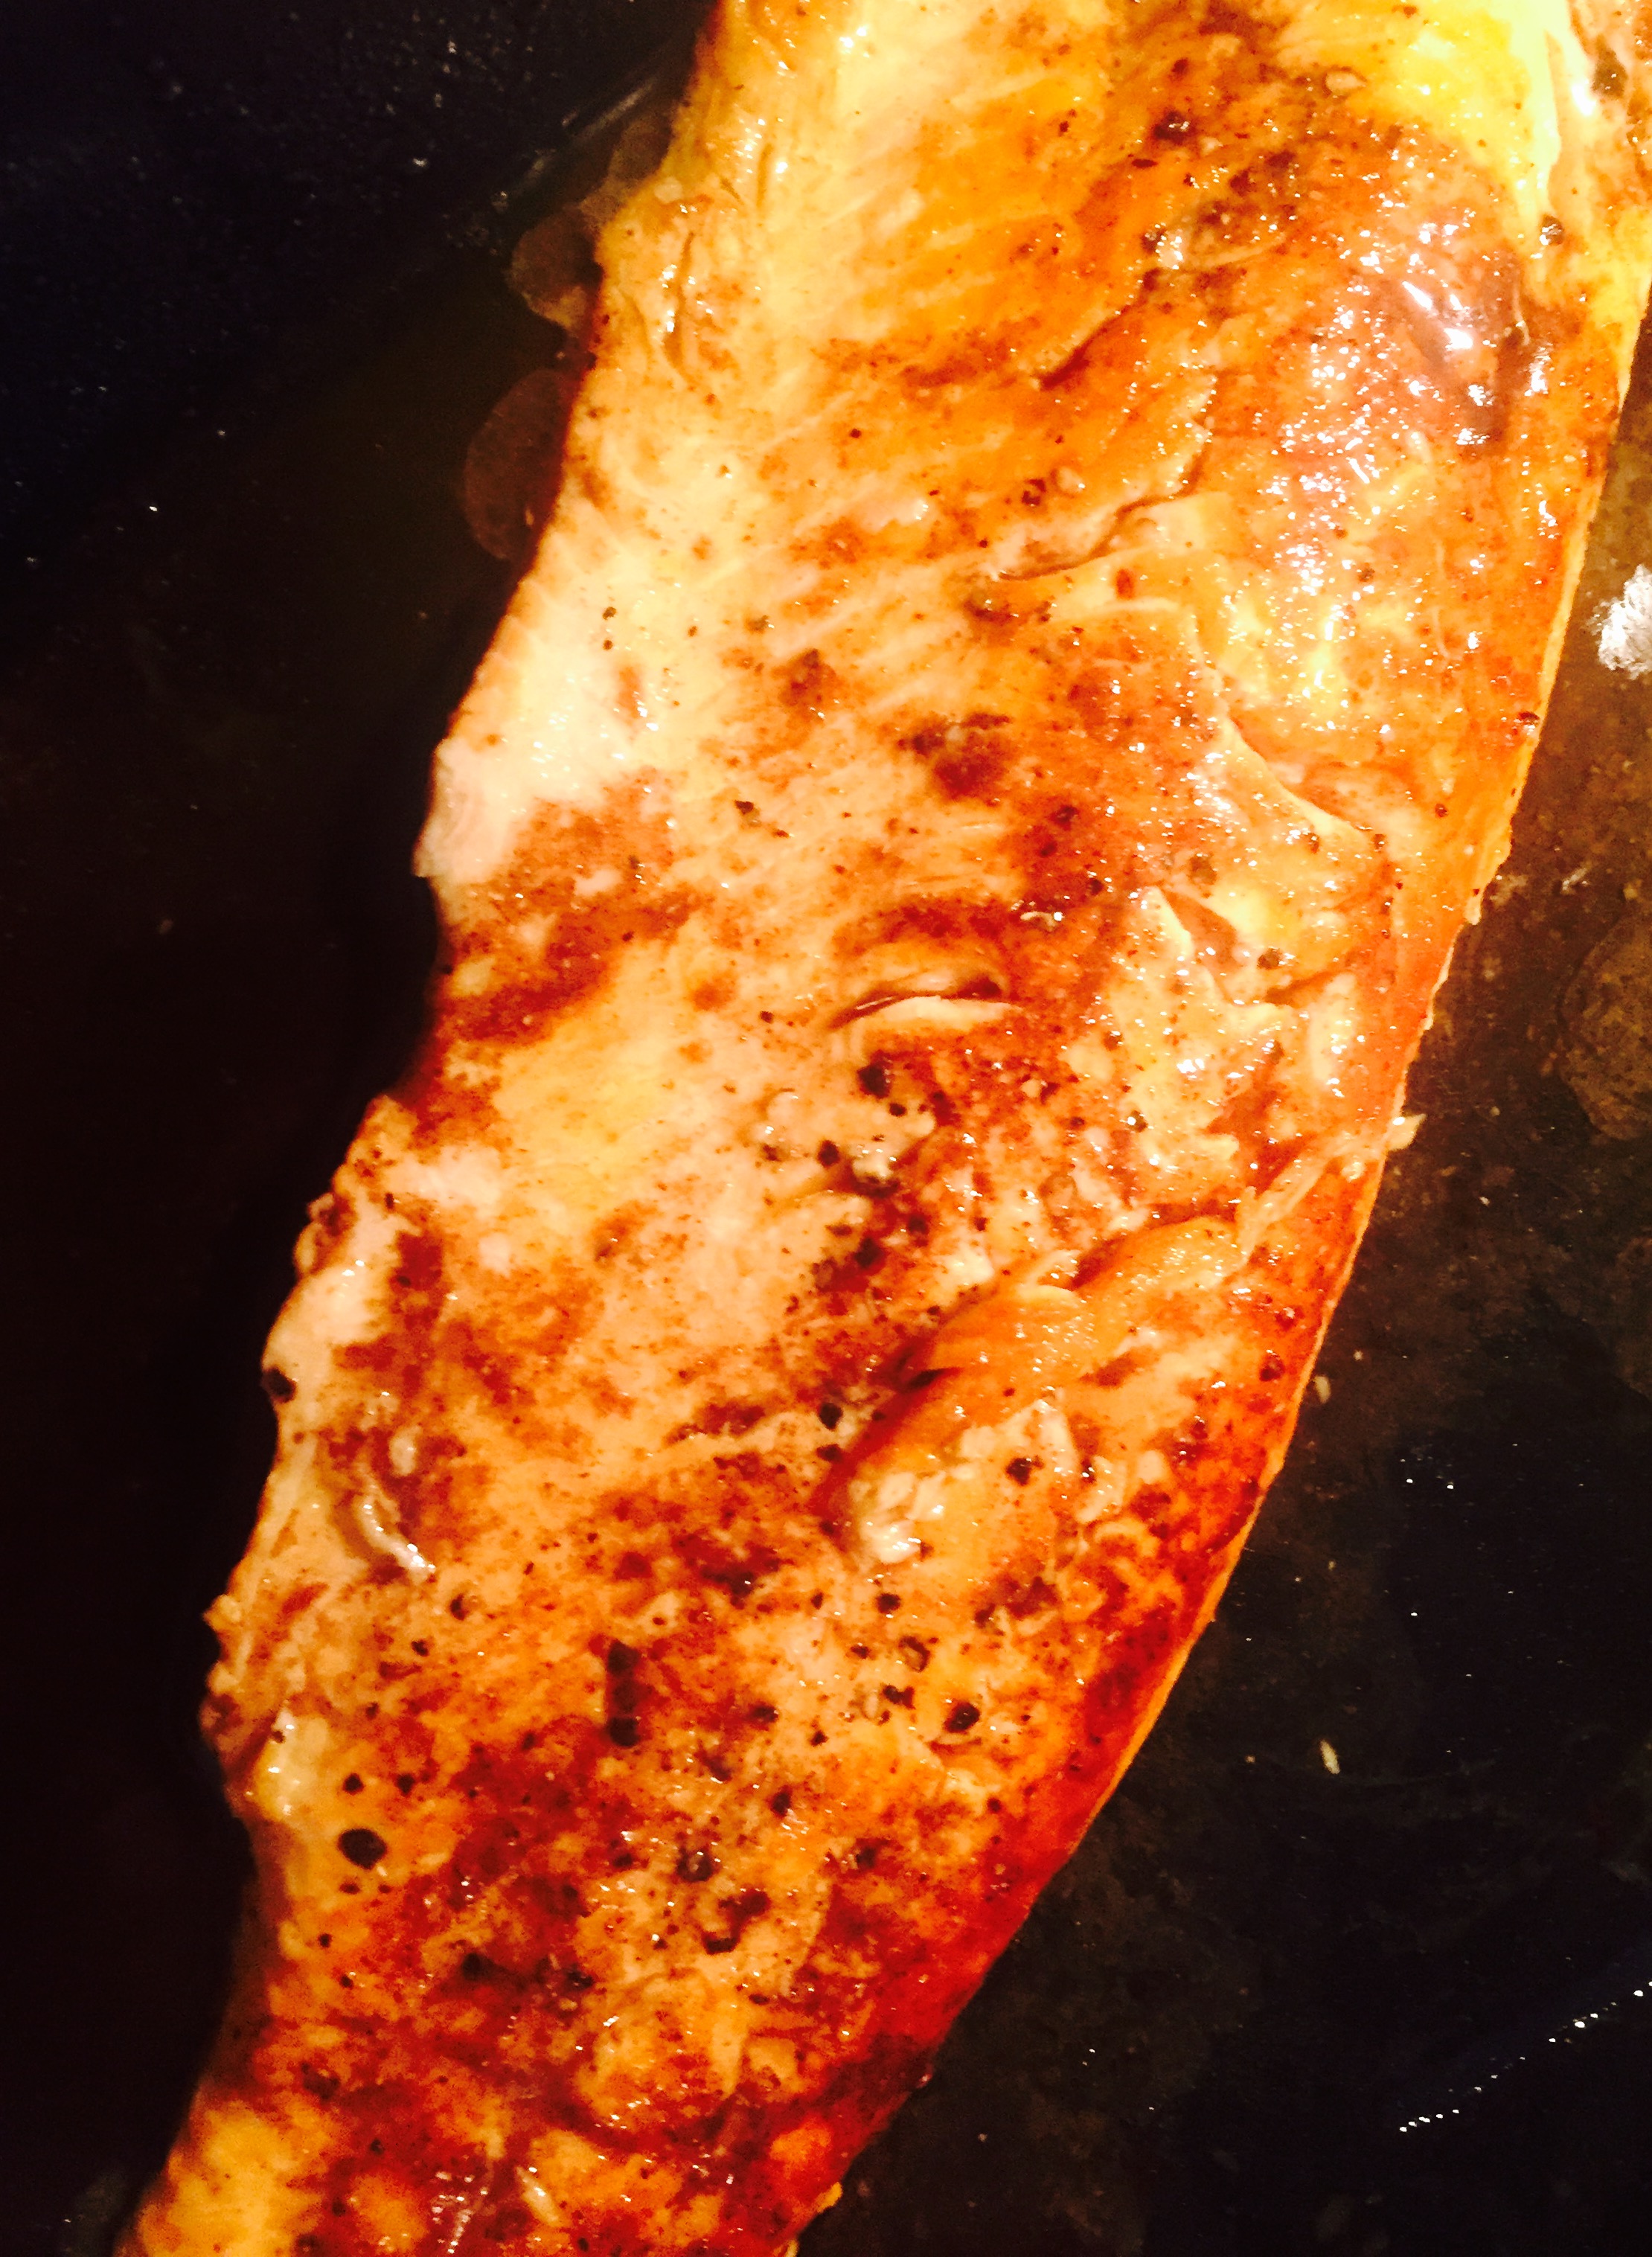 Seared arctic char smothered in a sumtuous sweet cumin and white wine reduction